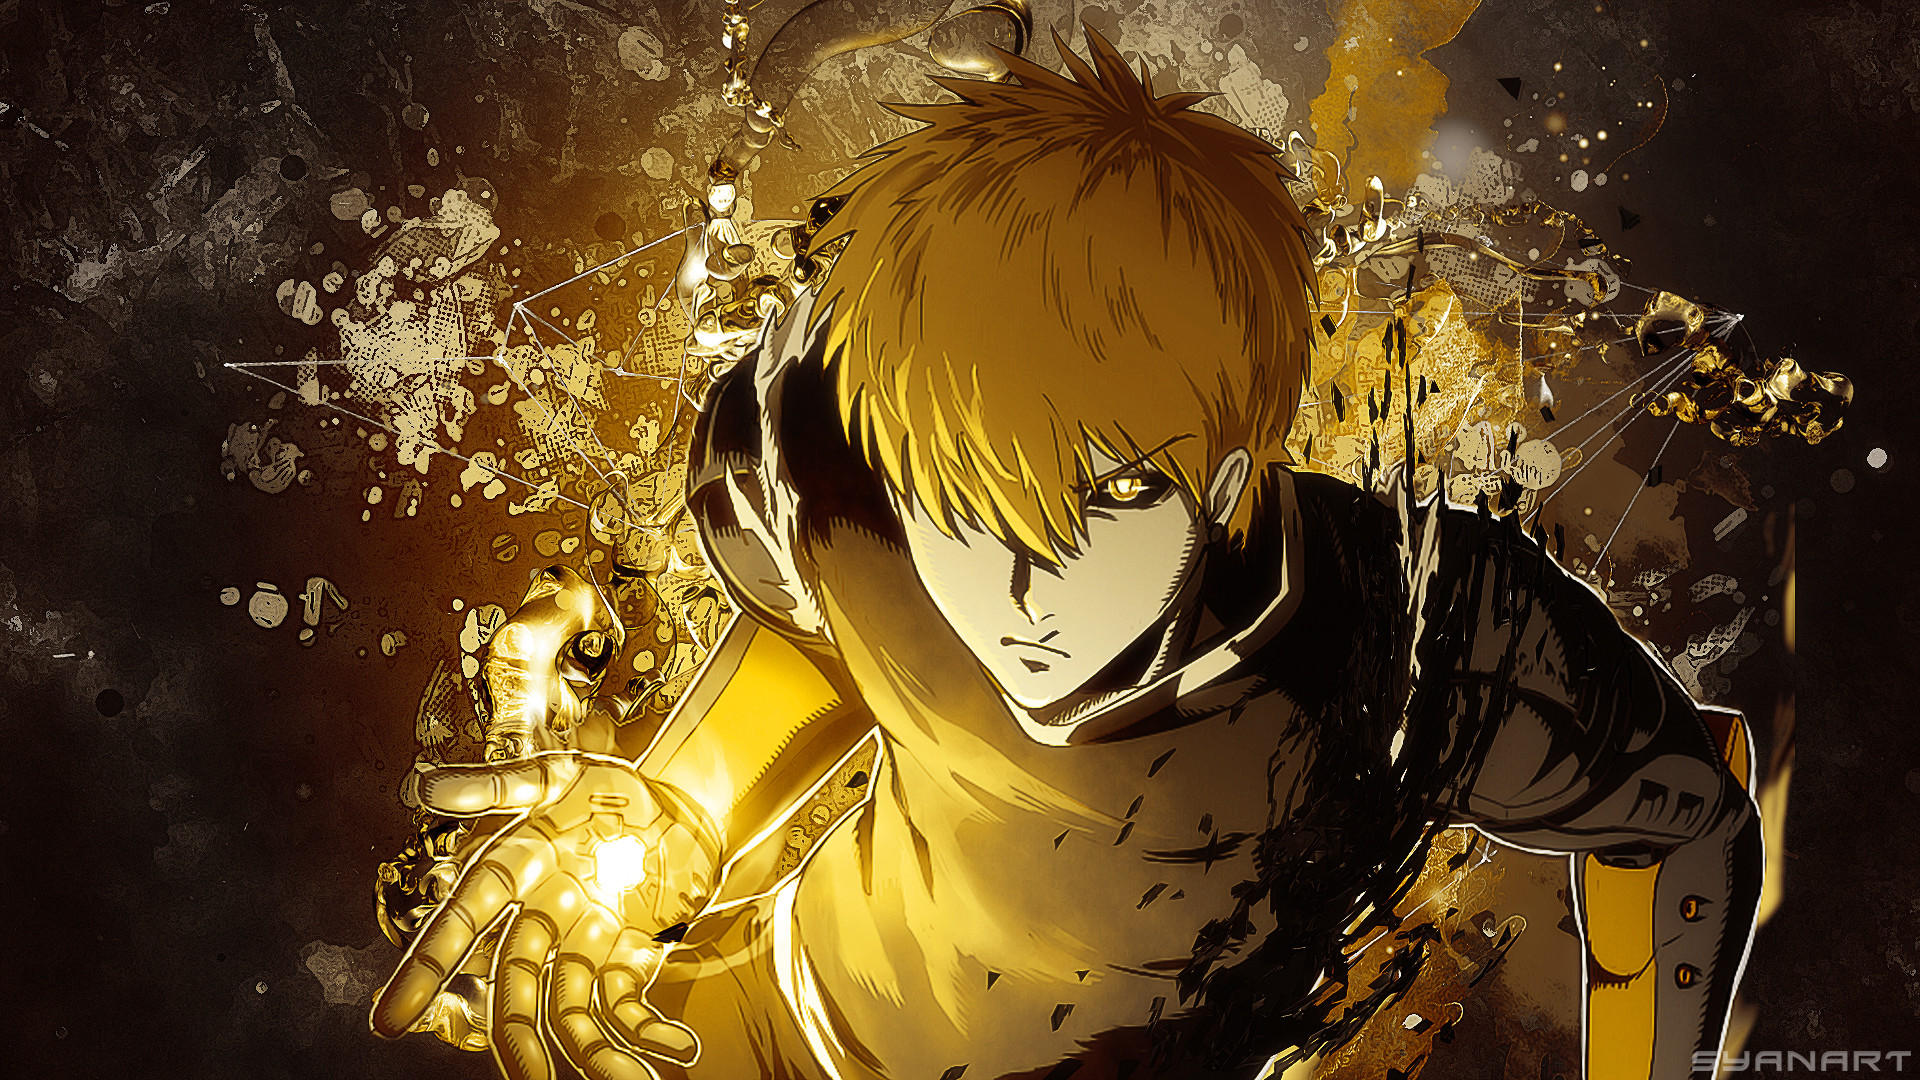 1920x1080 Post Views: 570. Categories: Anime. Tags: genos, one punch man wallpaper ...